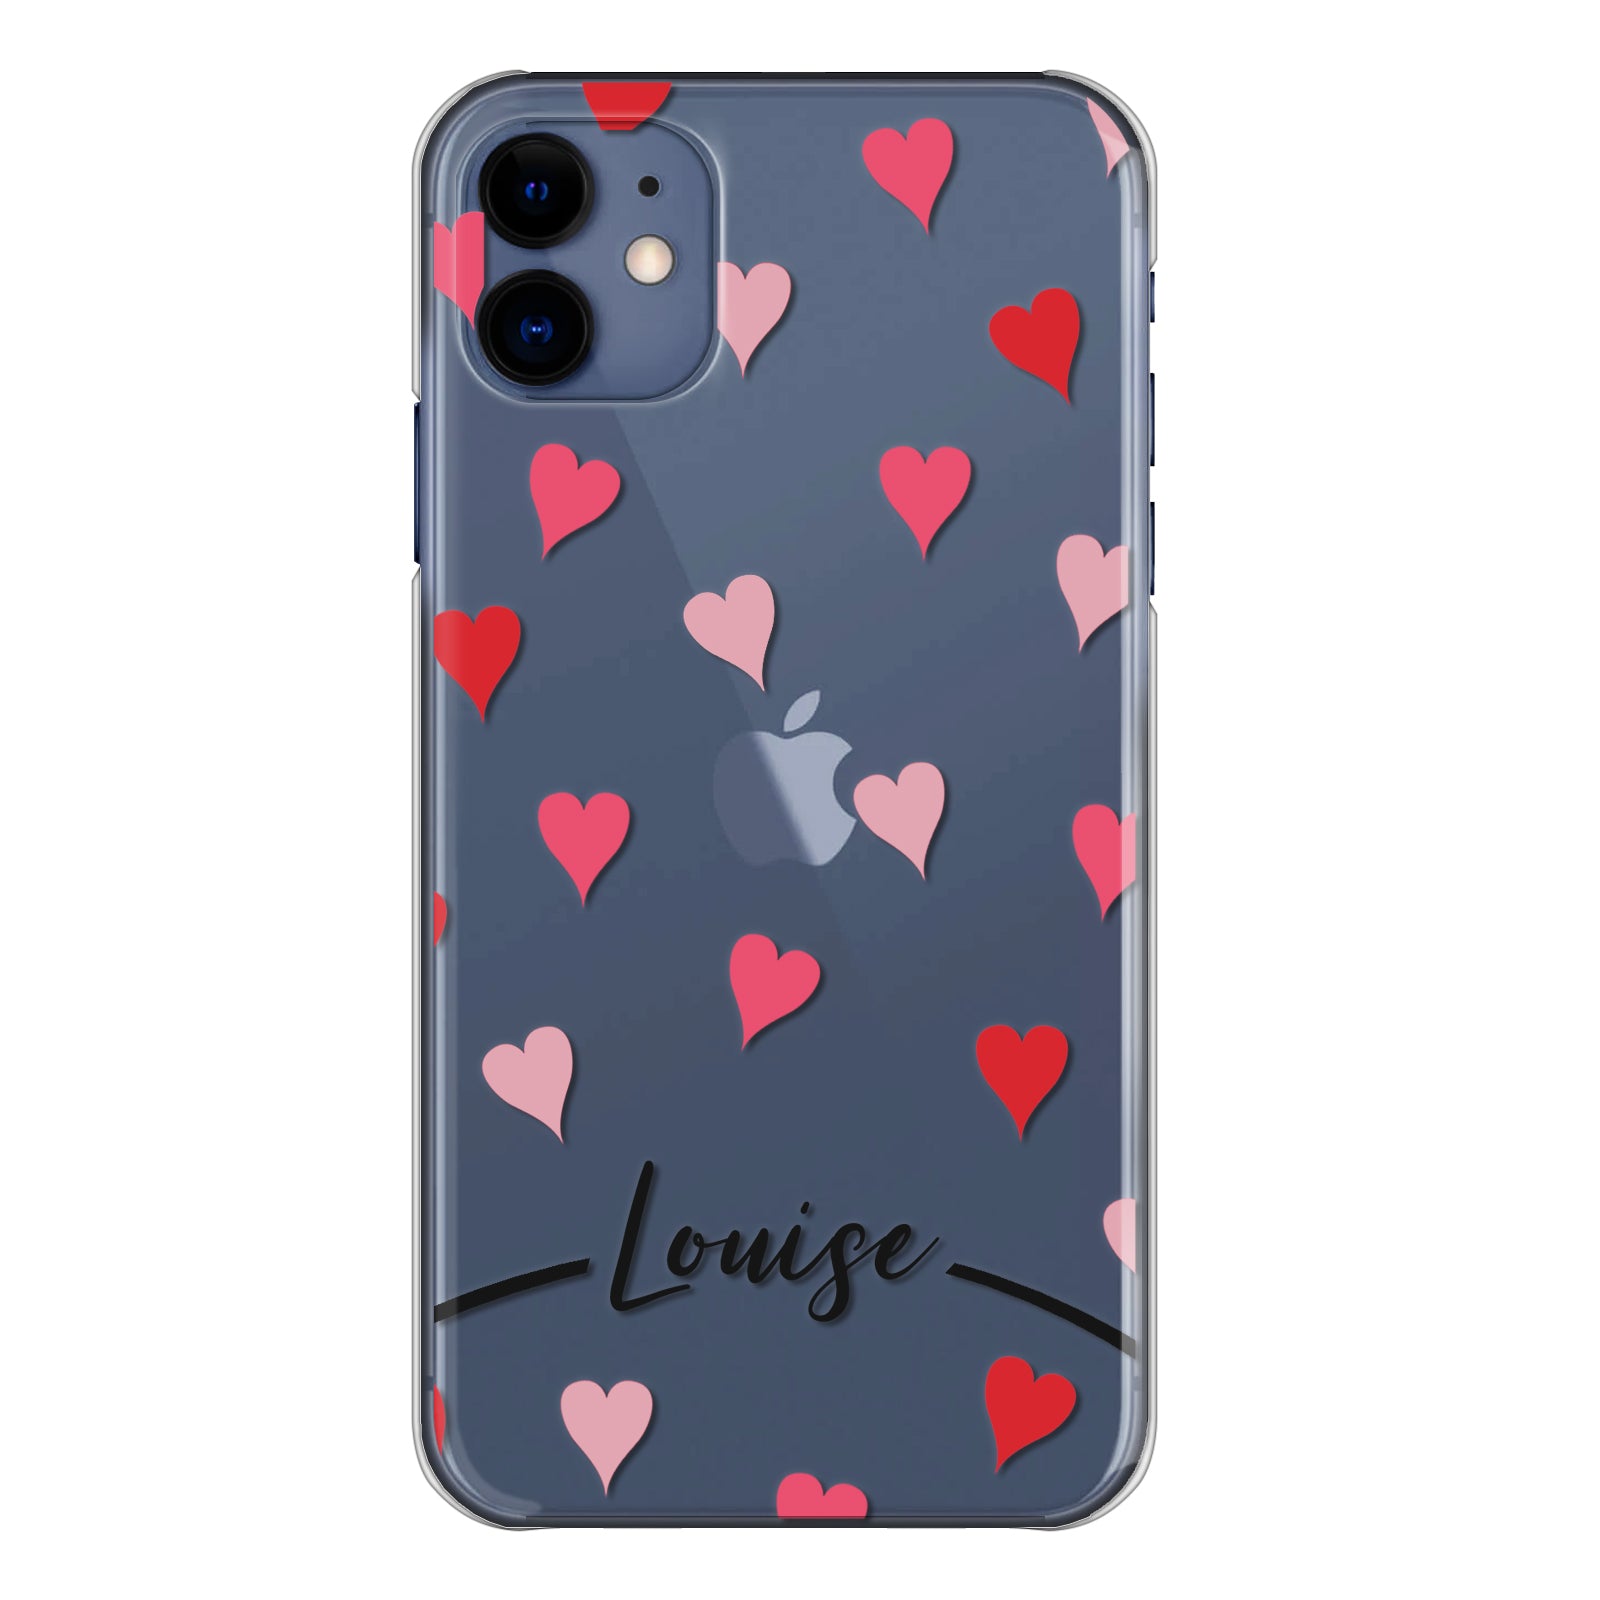 Personalised Nokia Phone Hard Case with Love Hearts and Stylish Text